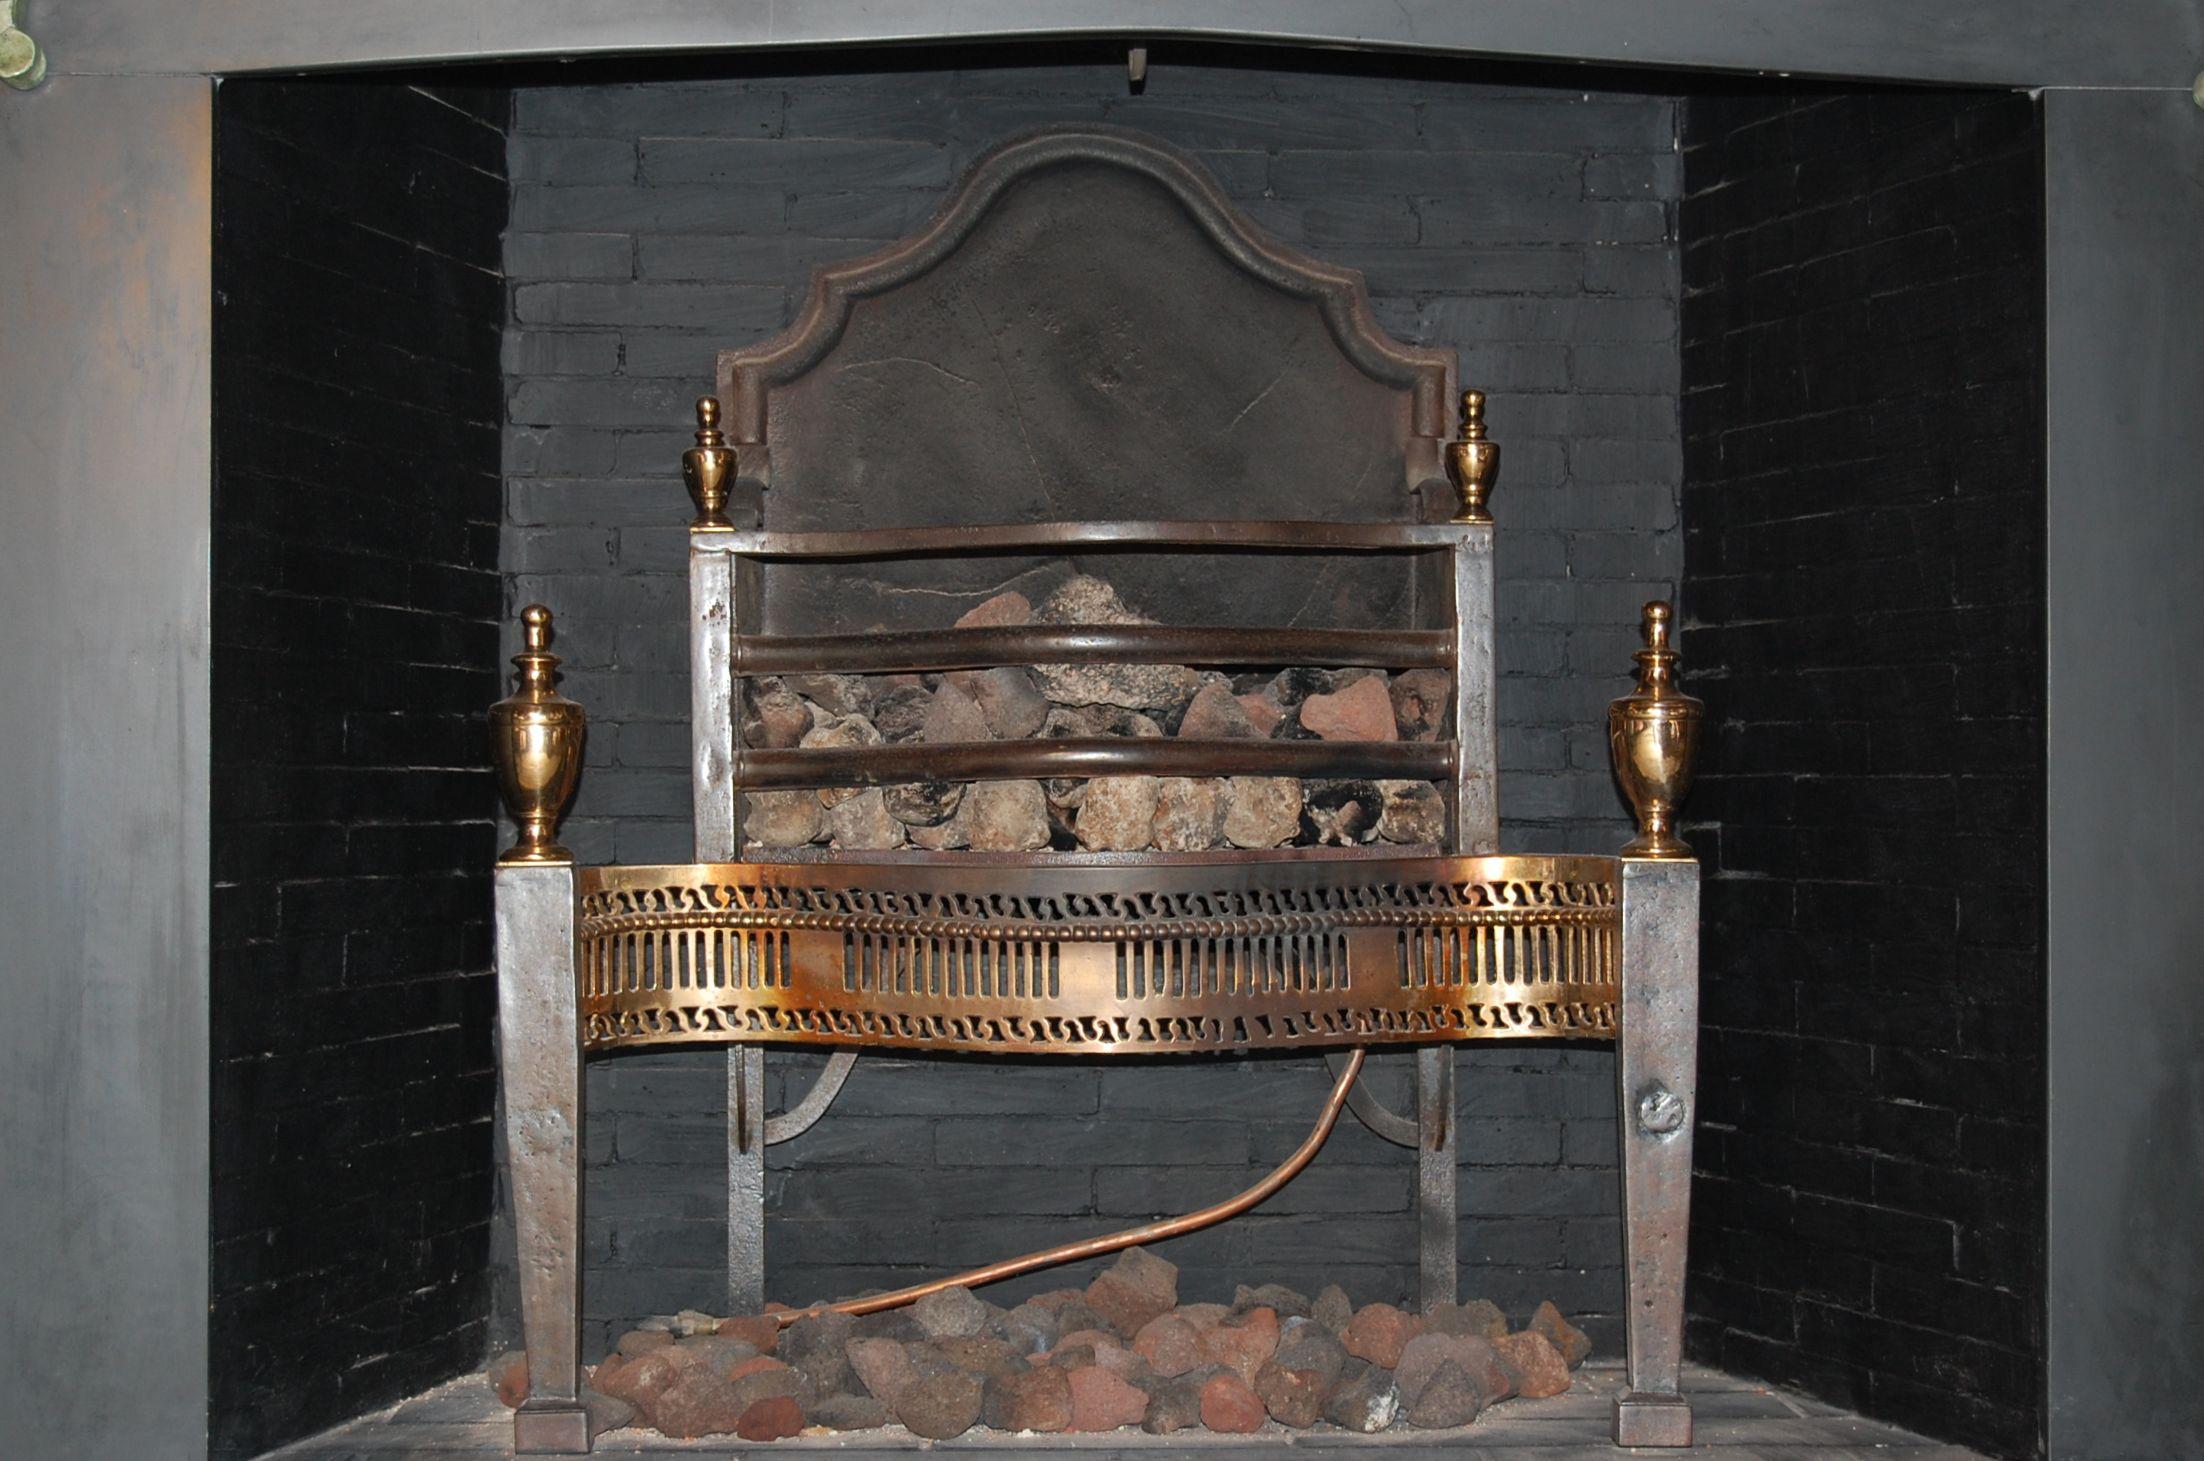 A mid-19th century brass and steel fire grate, with square tapering front supports surmounted by classical finials. A pierced brass fret work design and beading. The cast iron fire back is arched and does have a vertical crack, see notes below.